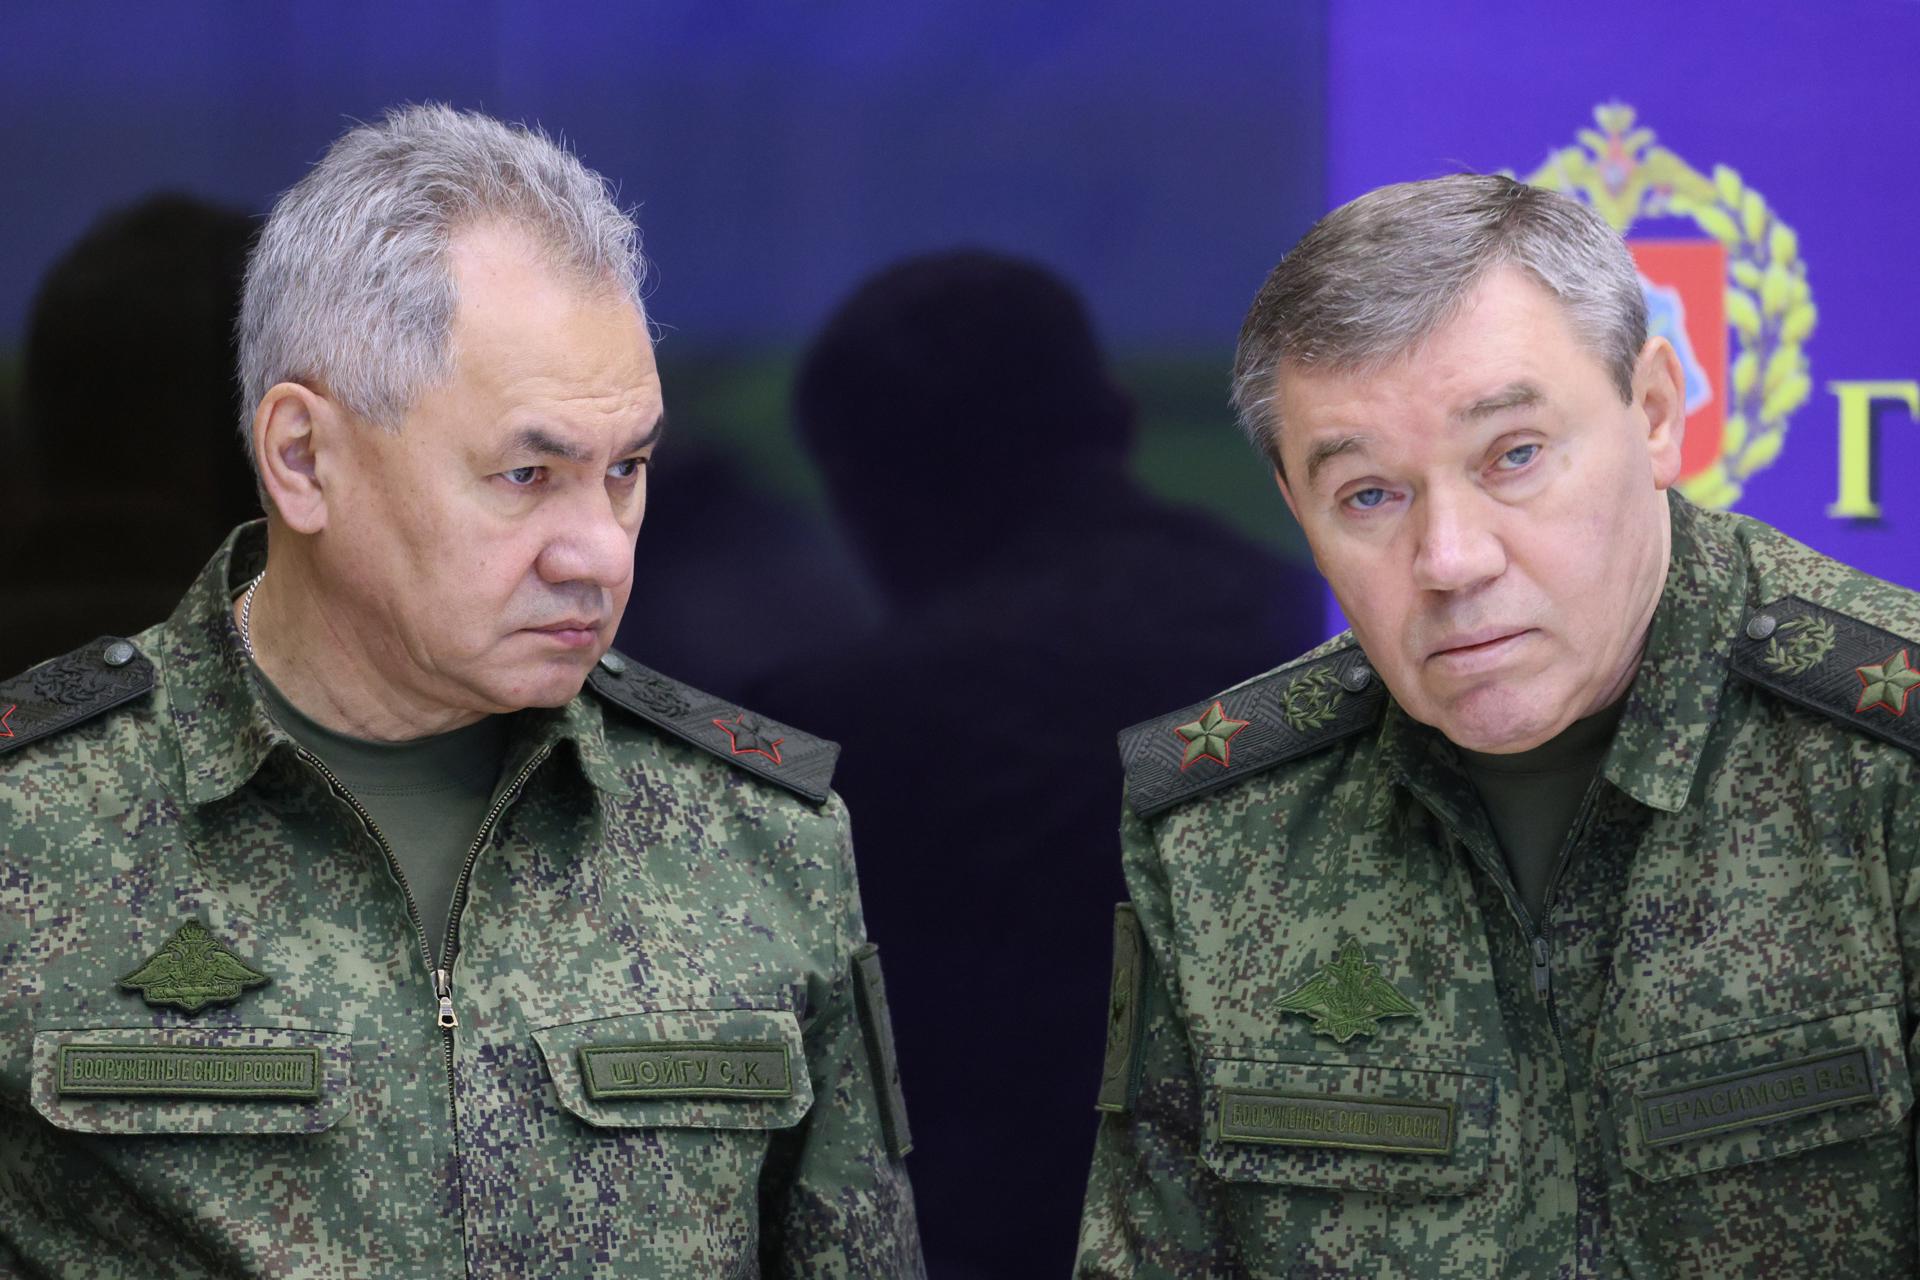 Russian Defense Minister Sergei Shoigu and the chief of the general staff, Valery Gerasimov during a visit by Russian President Vladimir Putin (not shown) to the headquarters of the military branches for the Kremlin's so-called "special military operation" against Ukraine at a site that Moscow has not revealed on Dec. 17, 2022. EFE-EPA/GAVRIIL GRIGOROV/SPUTNIK/KREMLIN / POOL